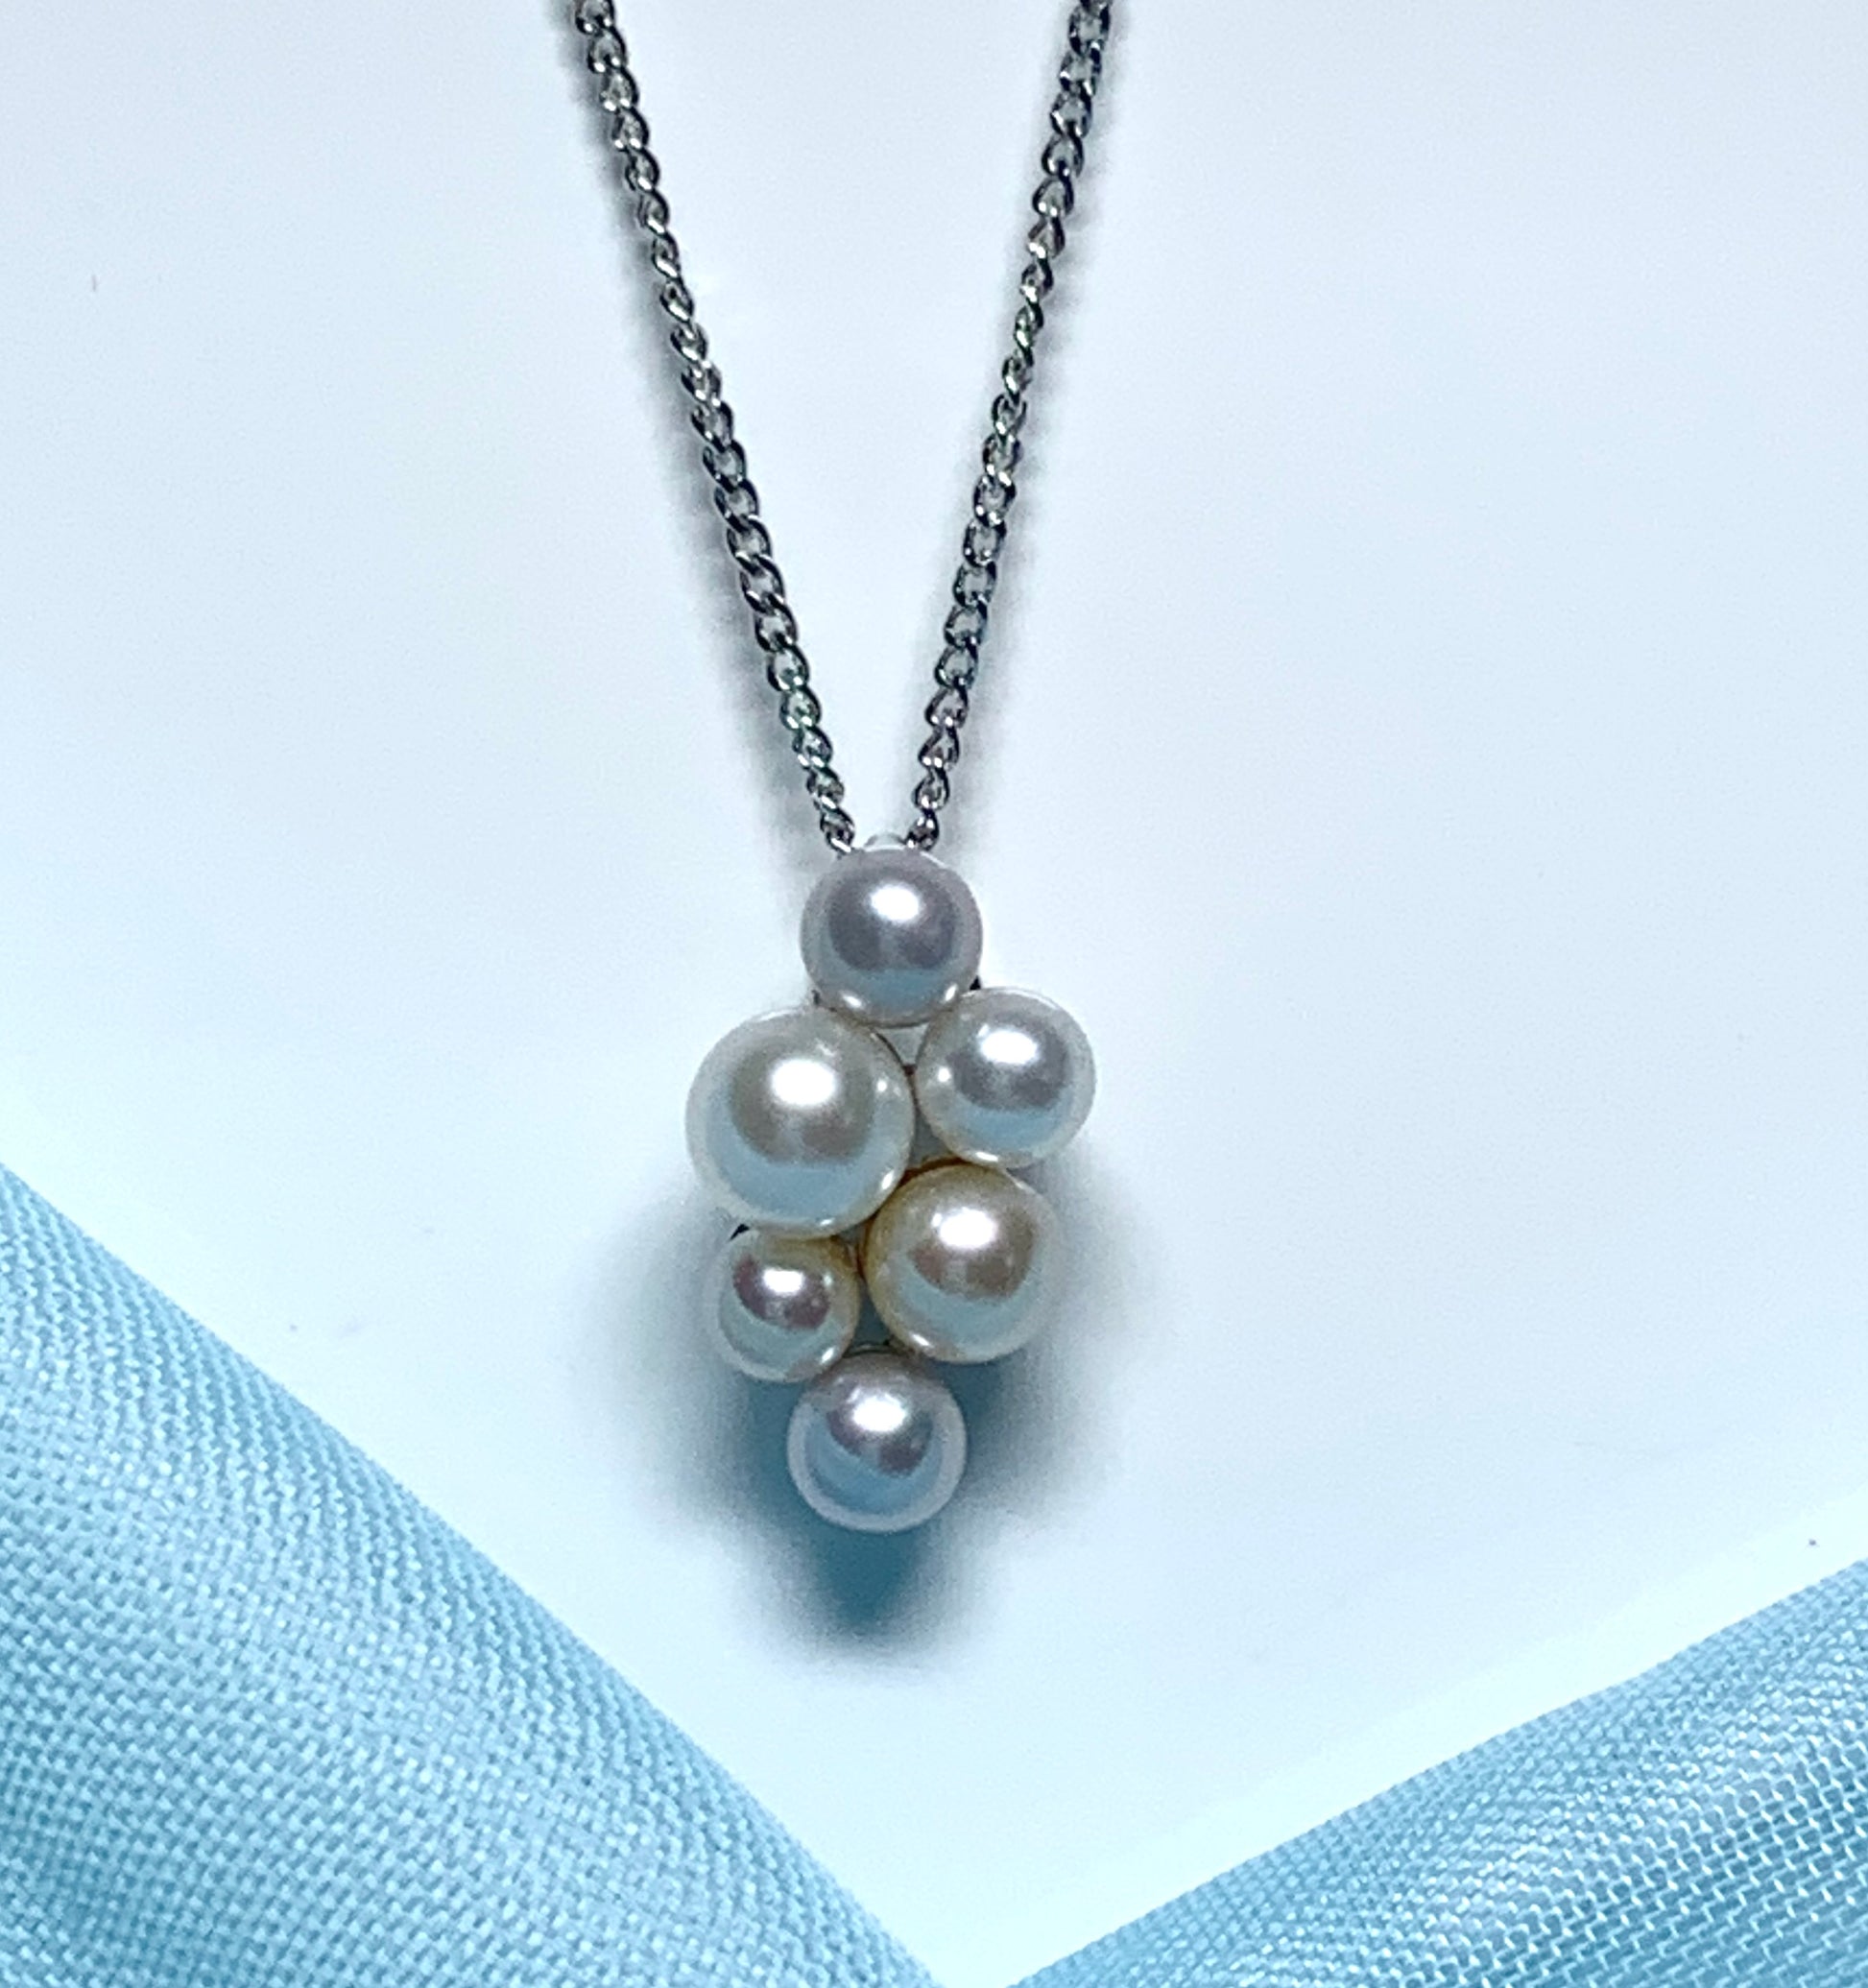 Cluster pearl necklace white gold pendant